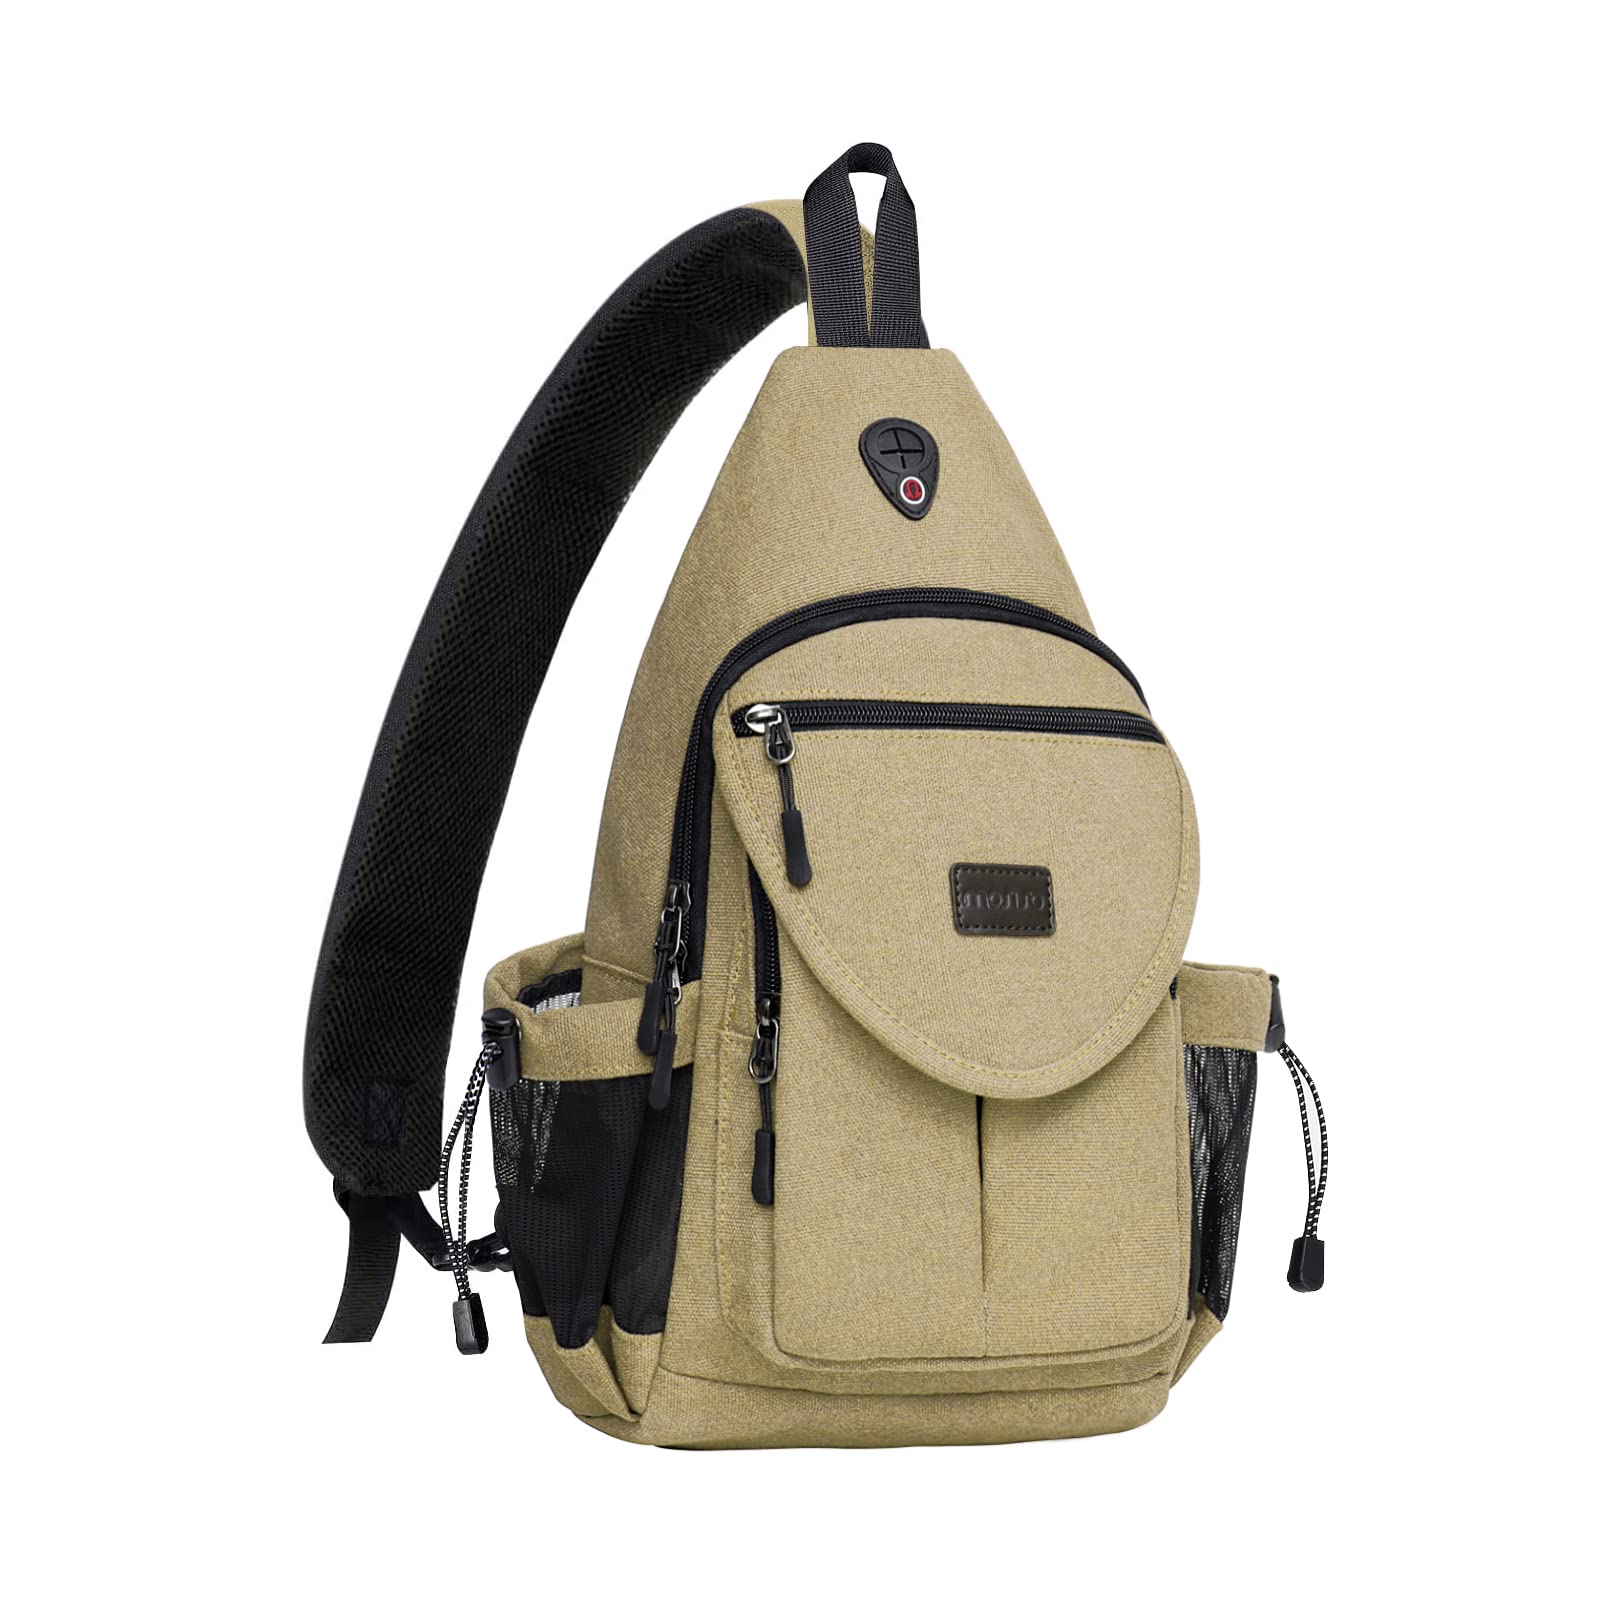 MOSISO Sling Backpack,Canvas Crossbody Hiking Daypack Bag with Anti-theft Pocket